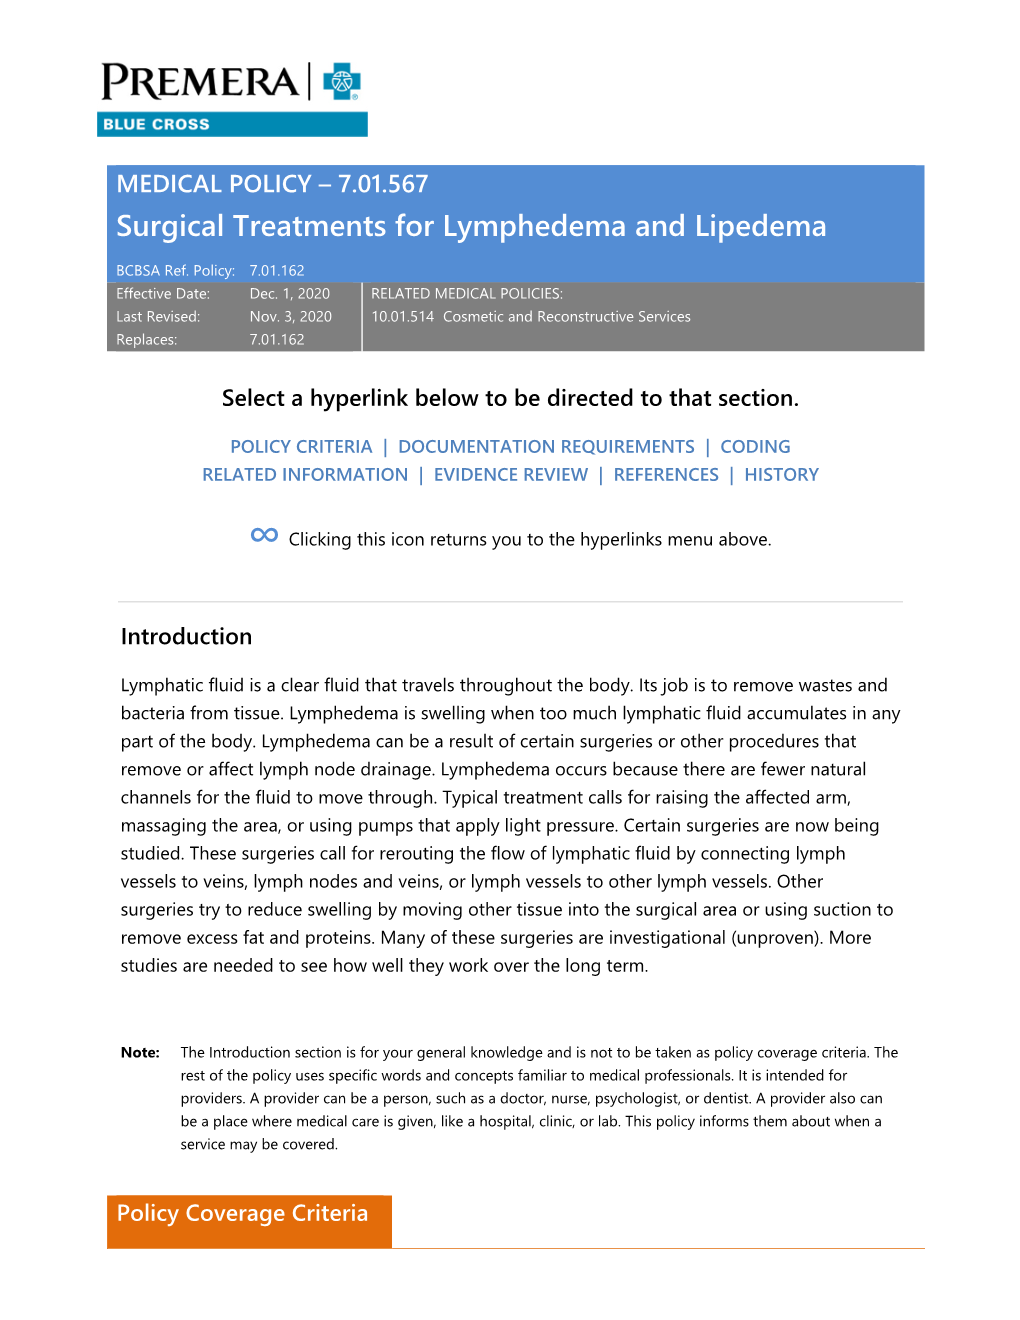 Surgical Treatments for Lymphedema and Lipedema, 7.01.567